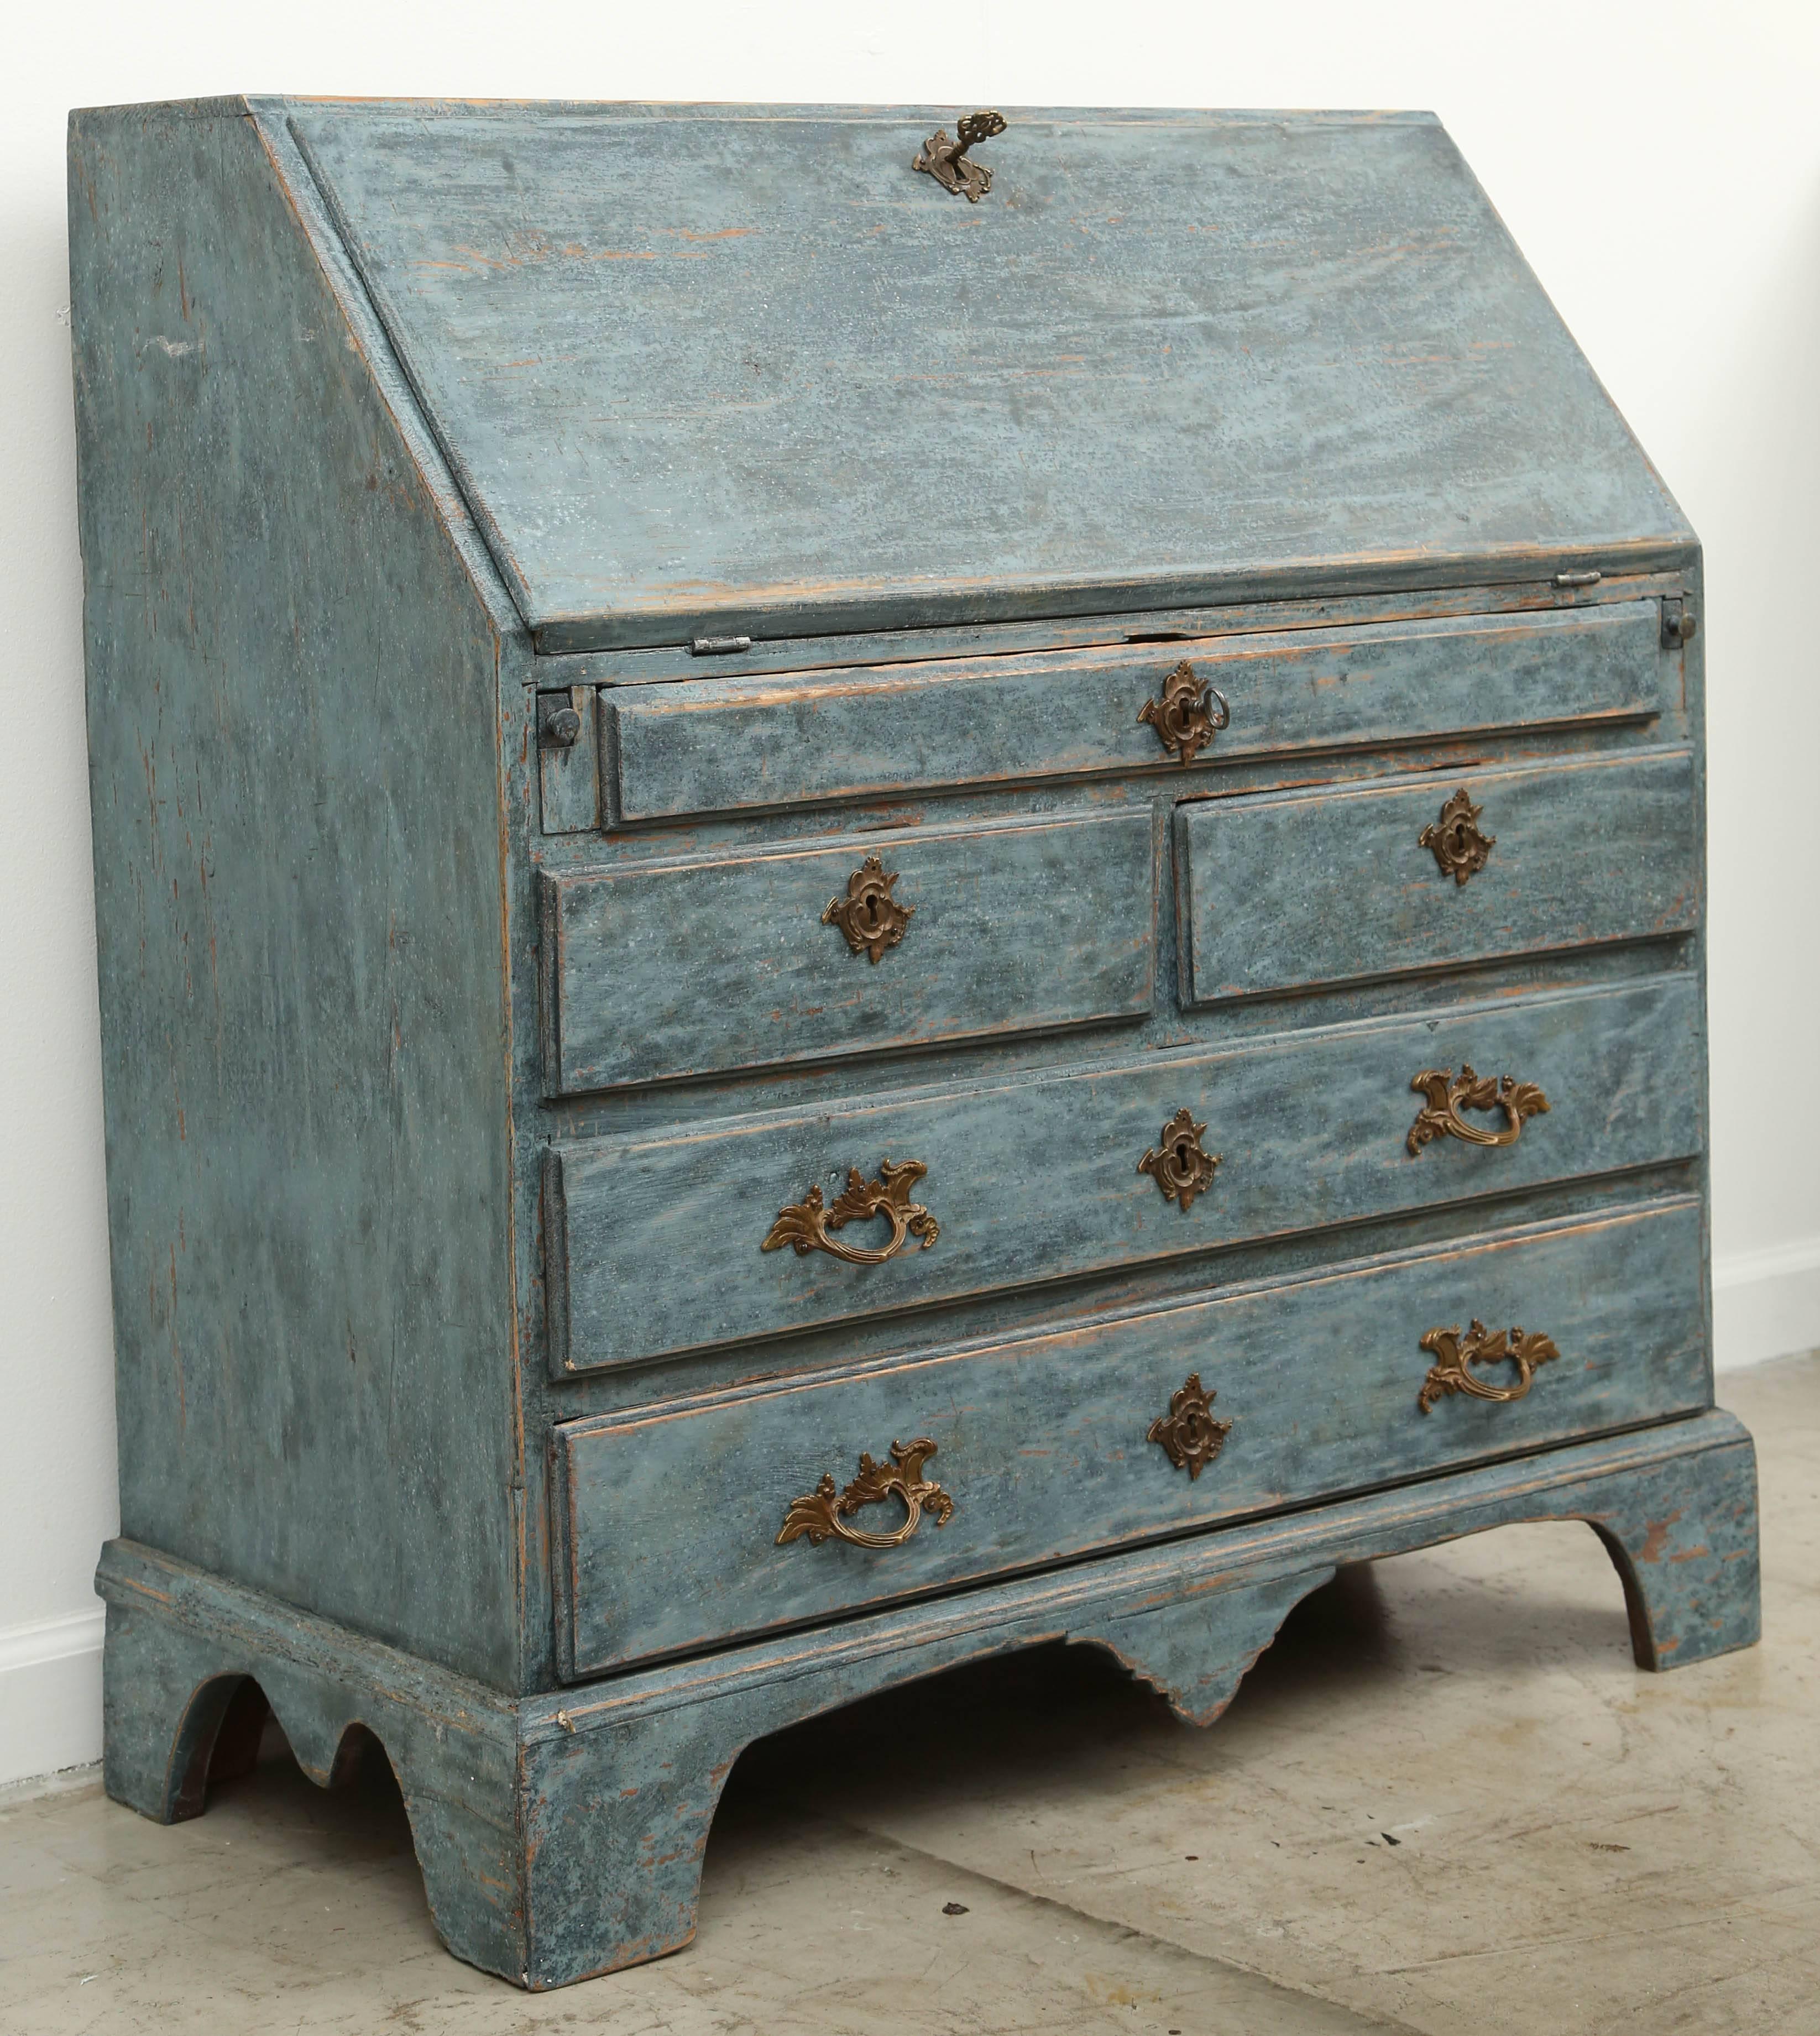 Antique Swedish blue slant front secretary desk, early 19th century.
Desk interior has one large centered cubby with four cubbies and two drawers on either side, interior painted gray finish, exterior Swedish blue distressed paint finish exposing